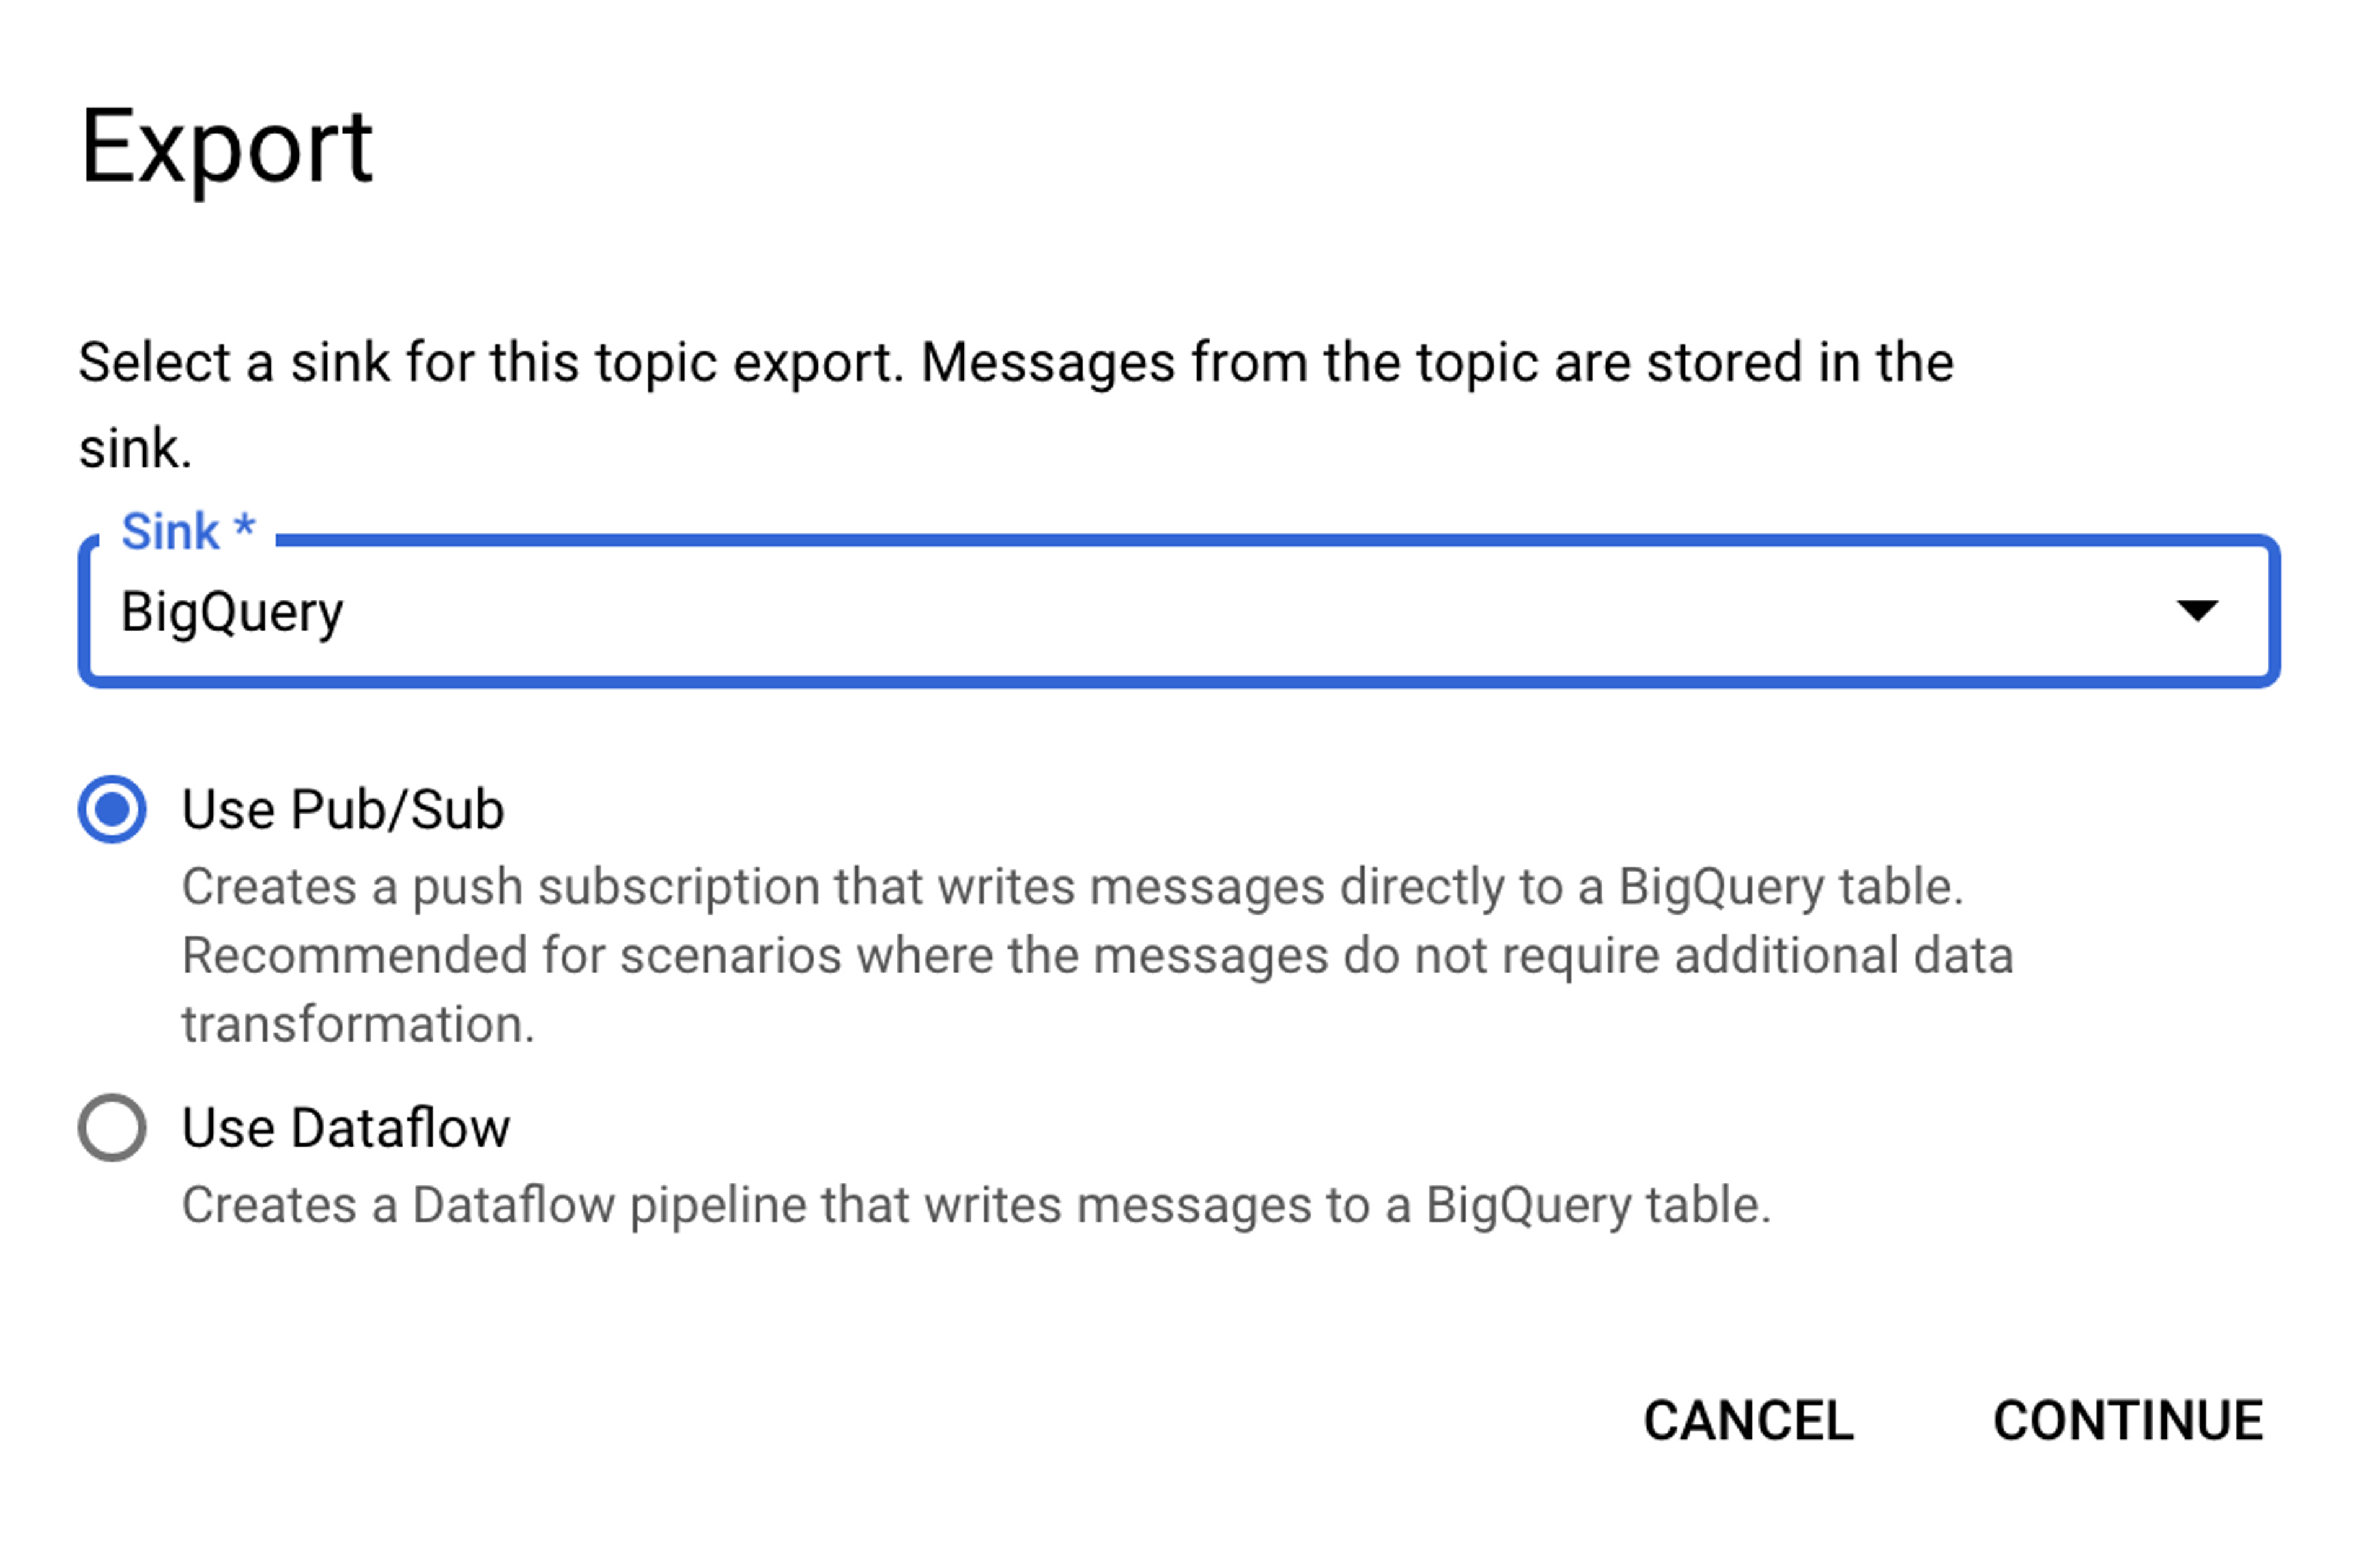 A screenshot of a section labeled "Export." The "Sink" dropdown value is selected as "BigQuery" and the Use Pub/Sub radio is selected.